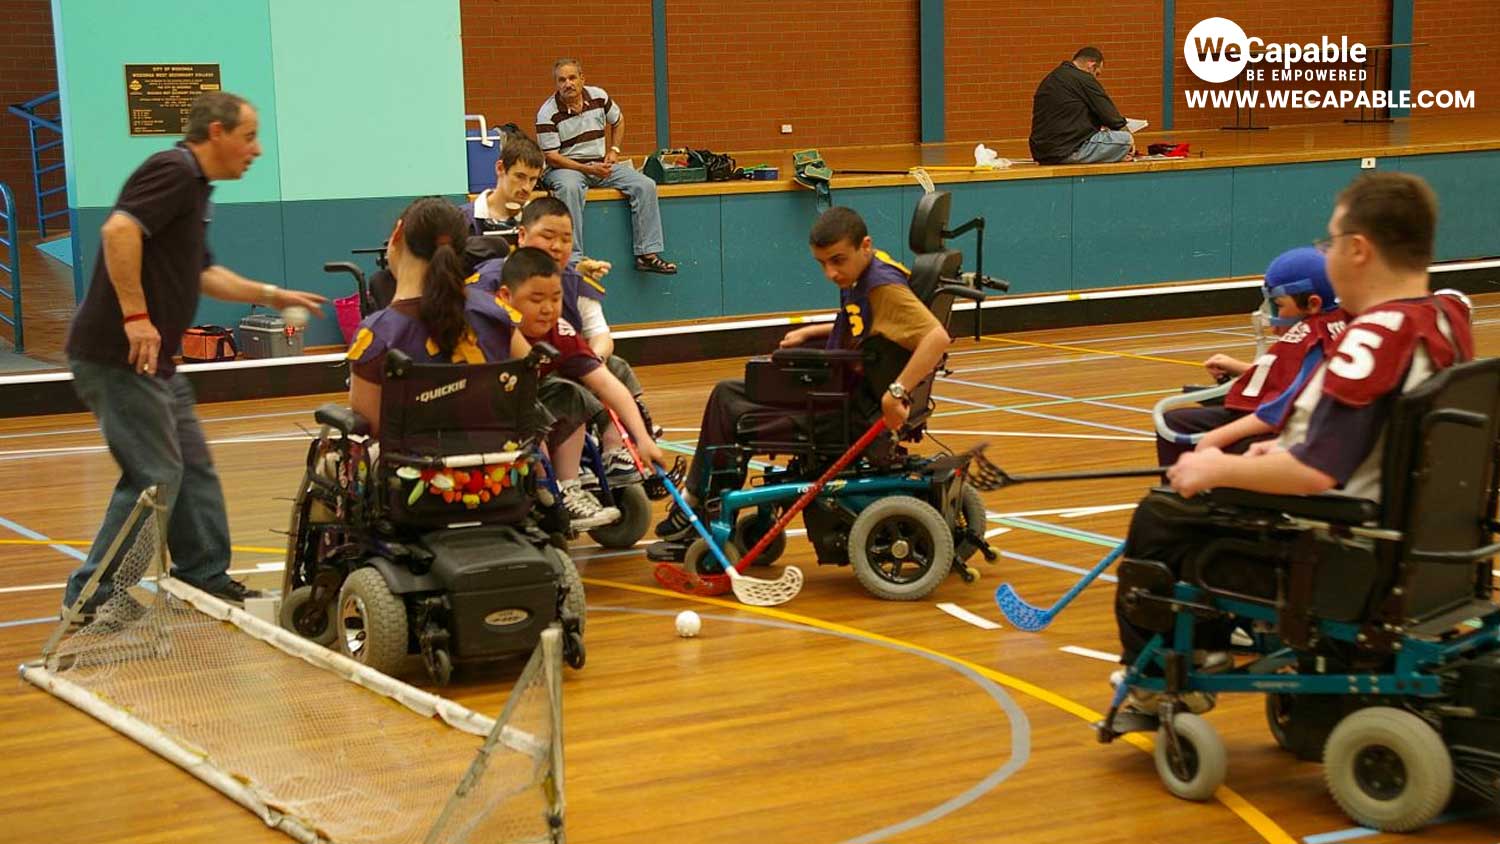 a power hockey or wheelchair hockey match is going on